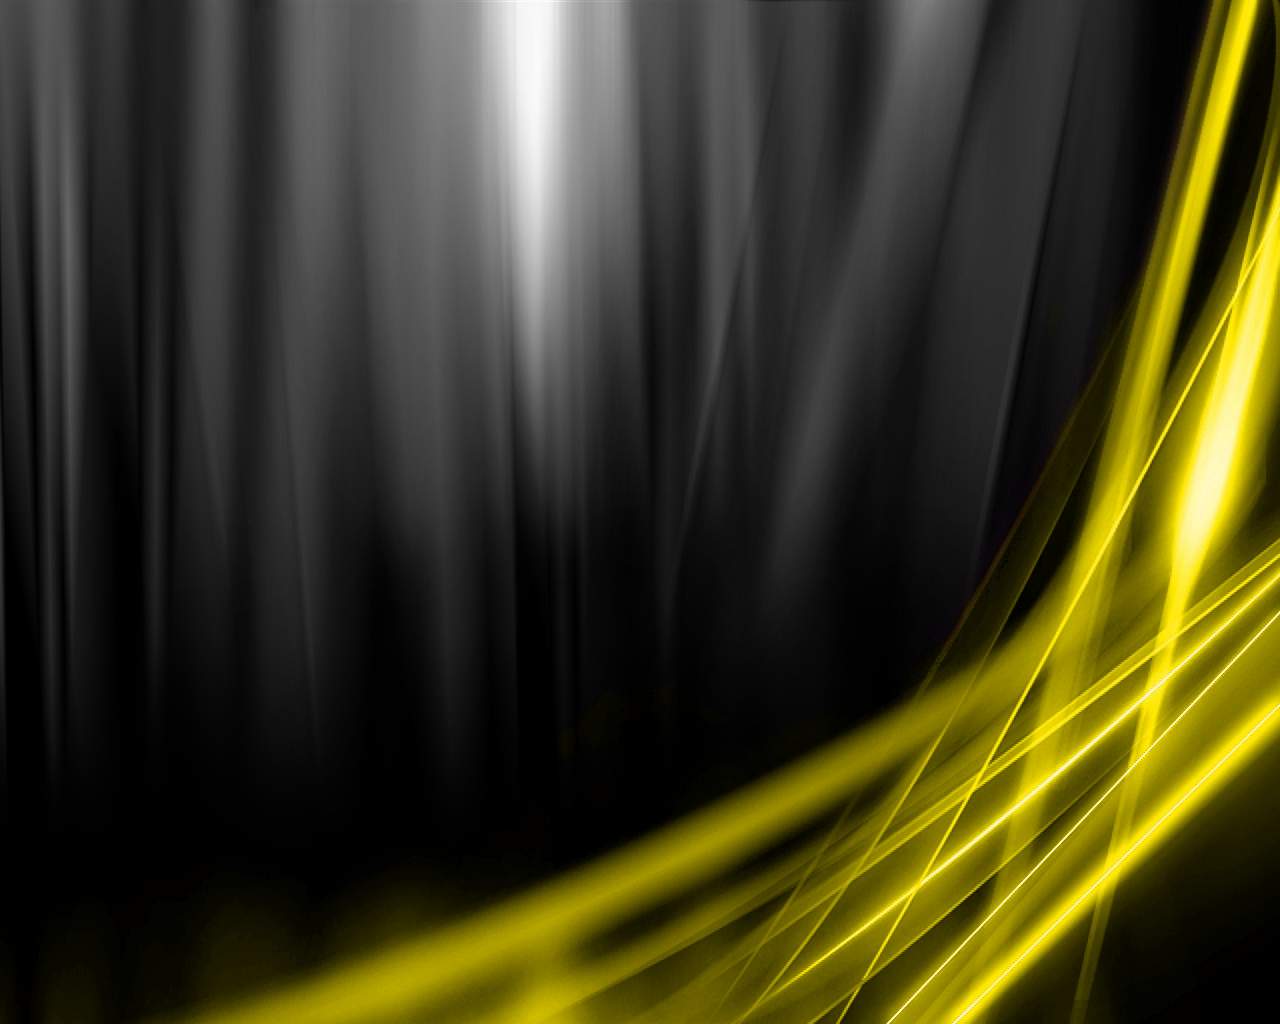  Yellow Wallpapers   High Quality Defiantion Black Yellow Wallpapers